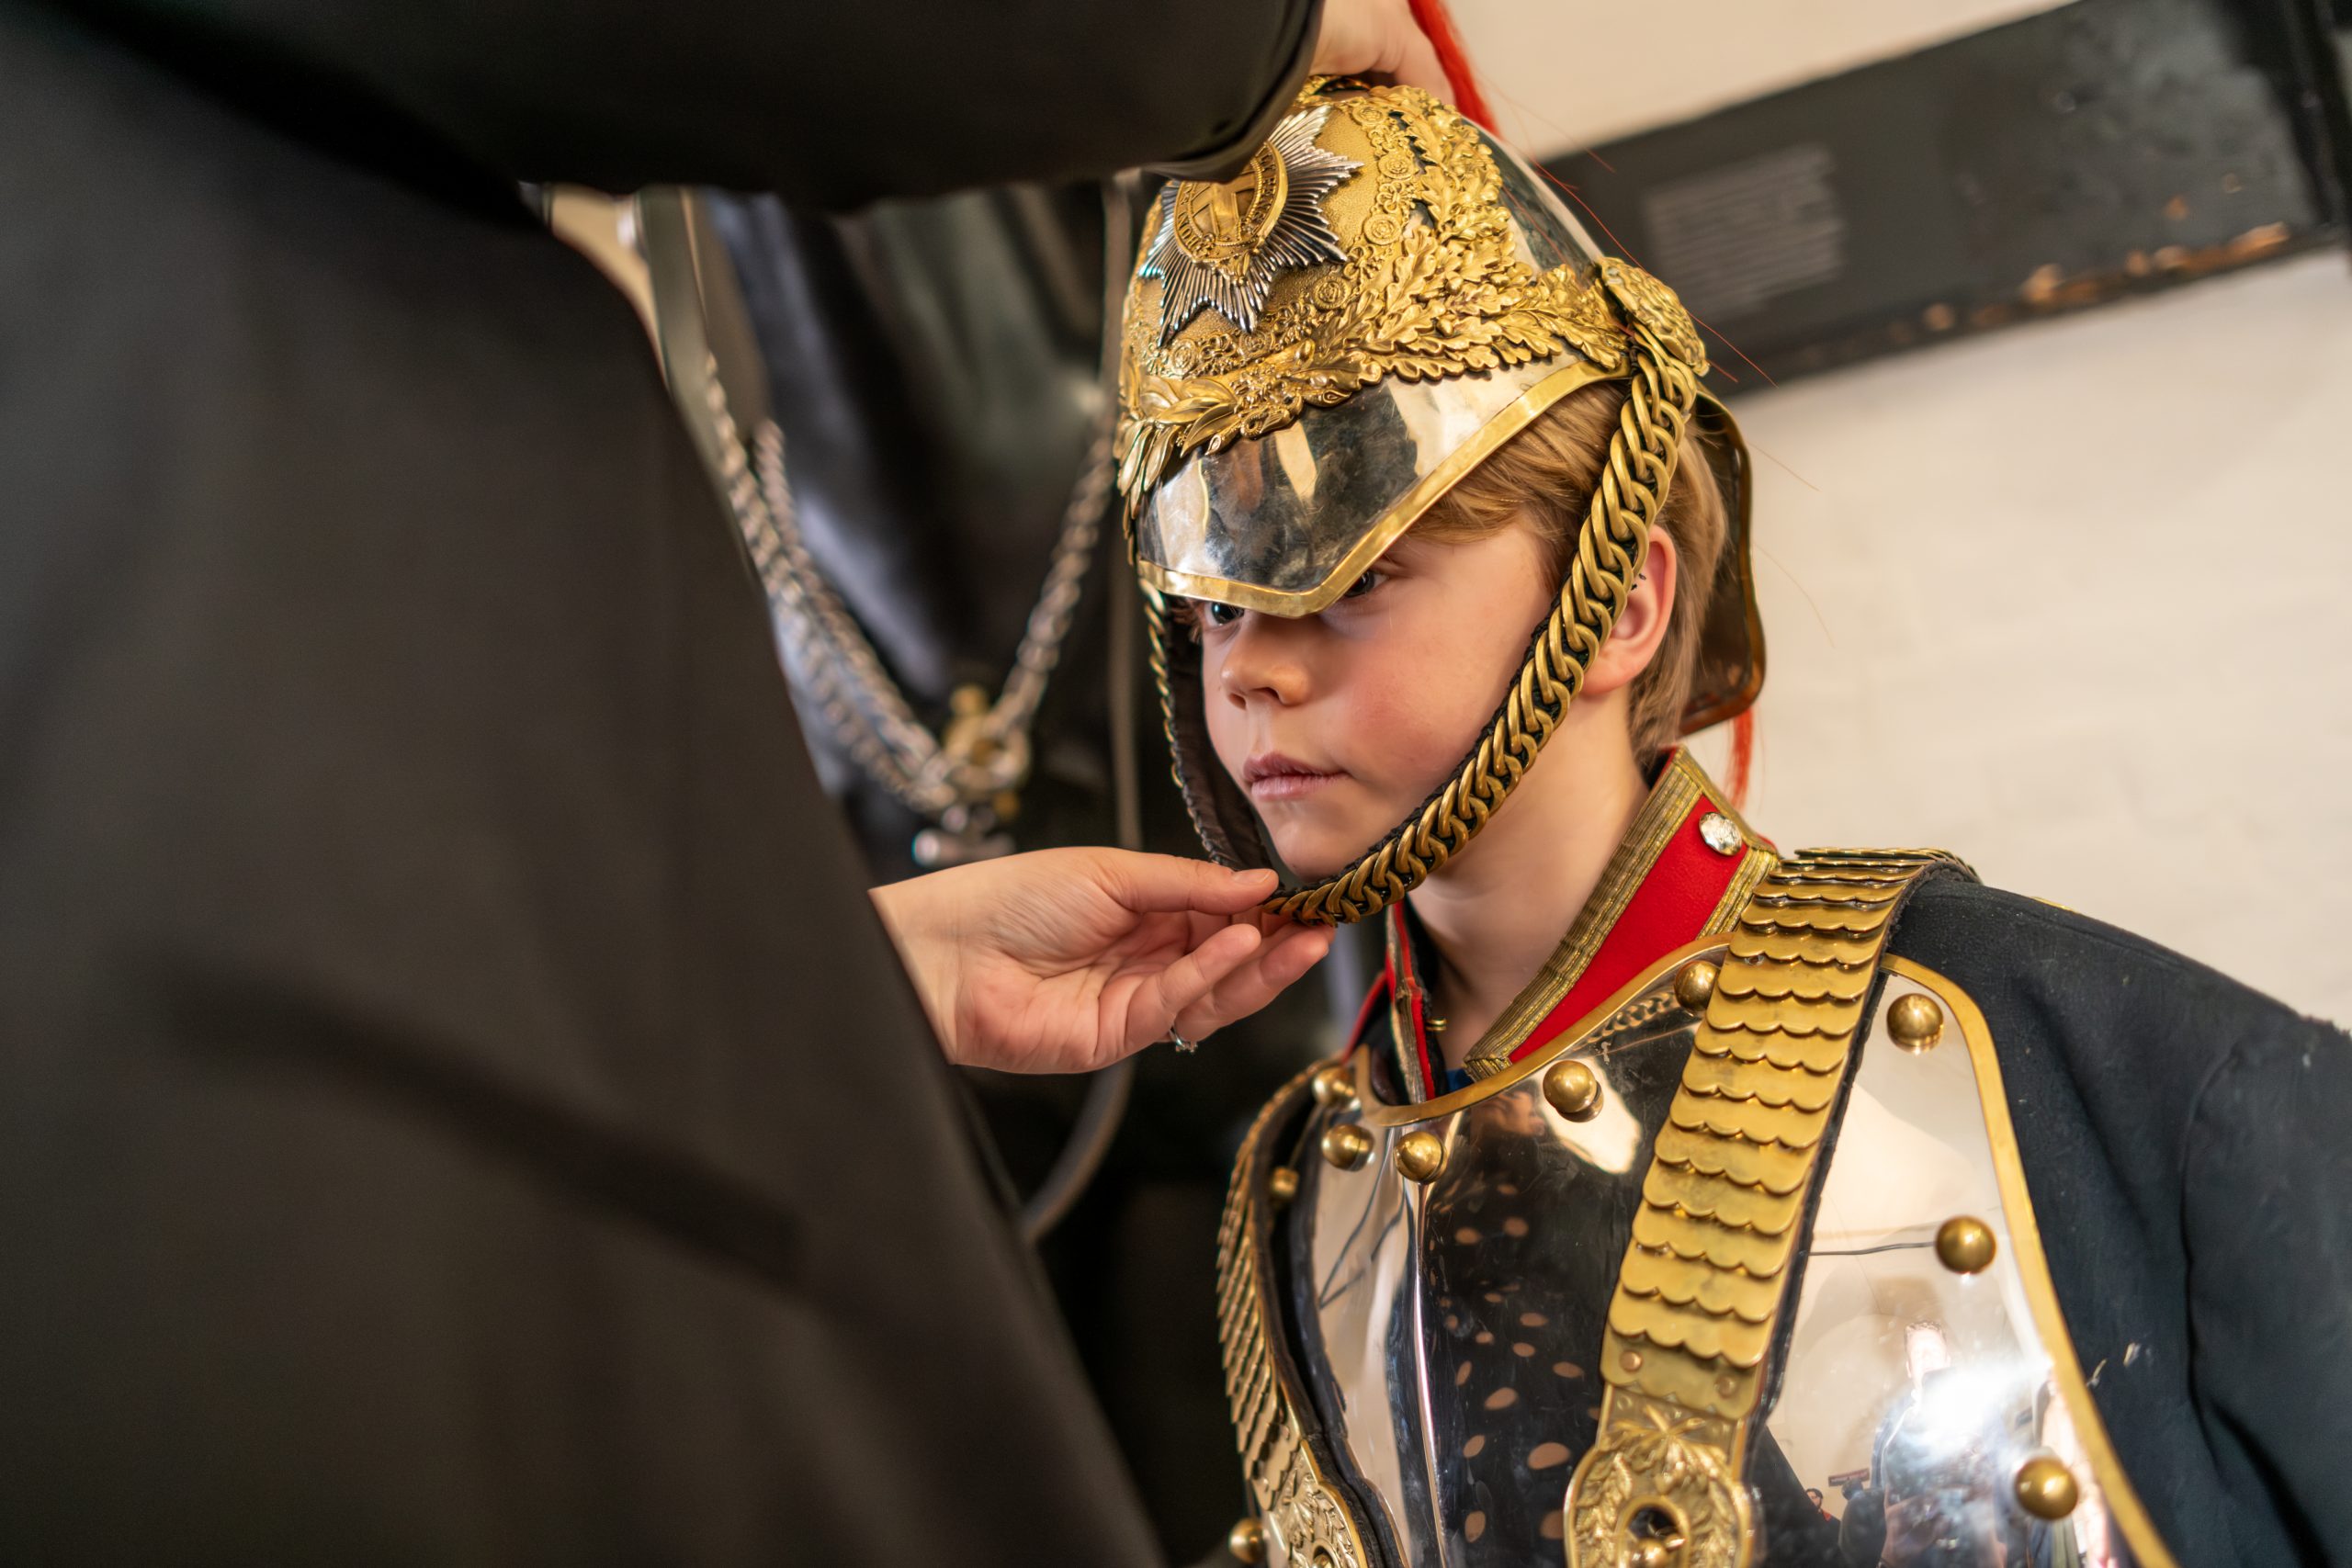 Dress like a Cavalry Soldier